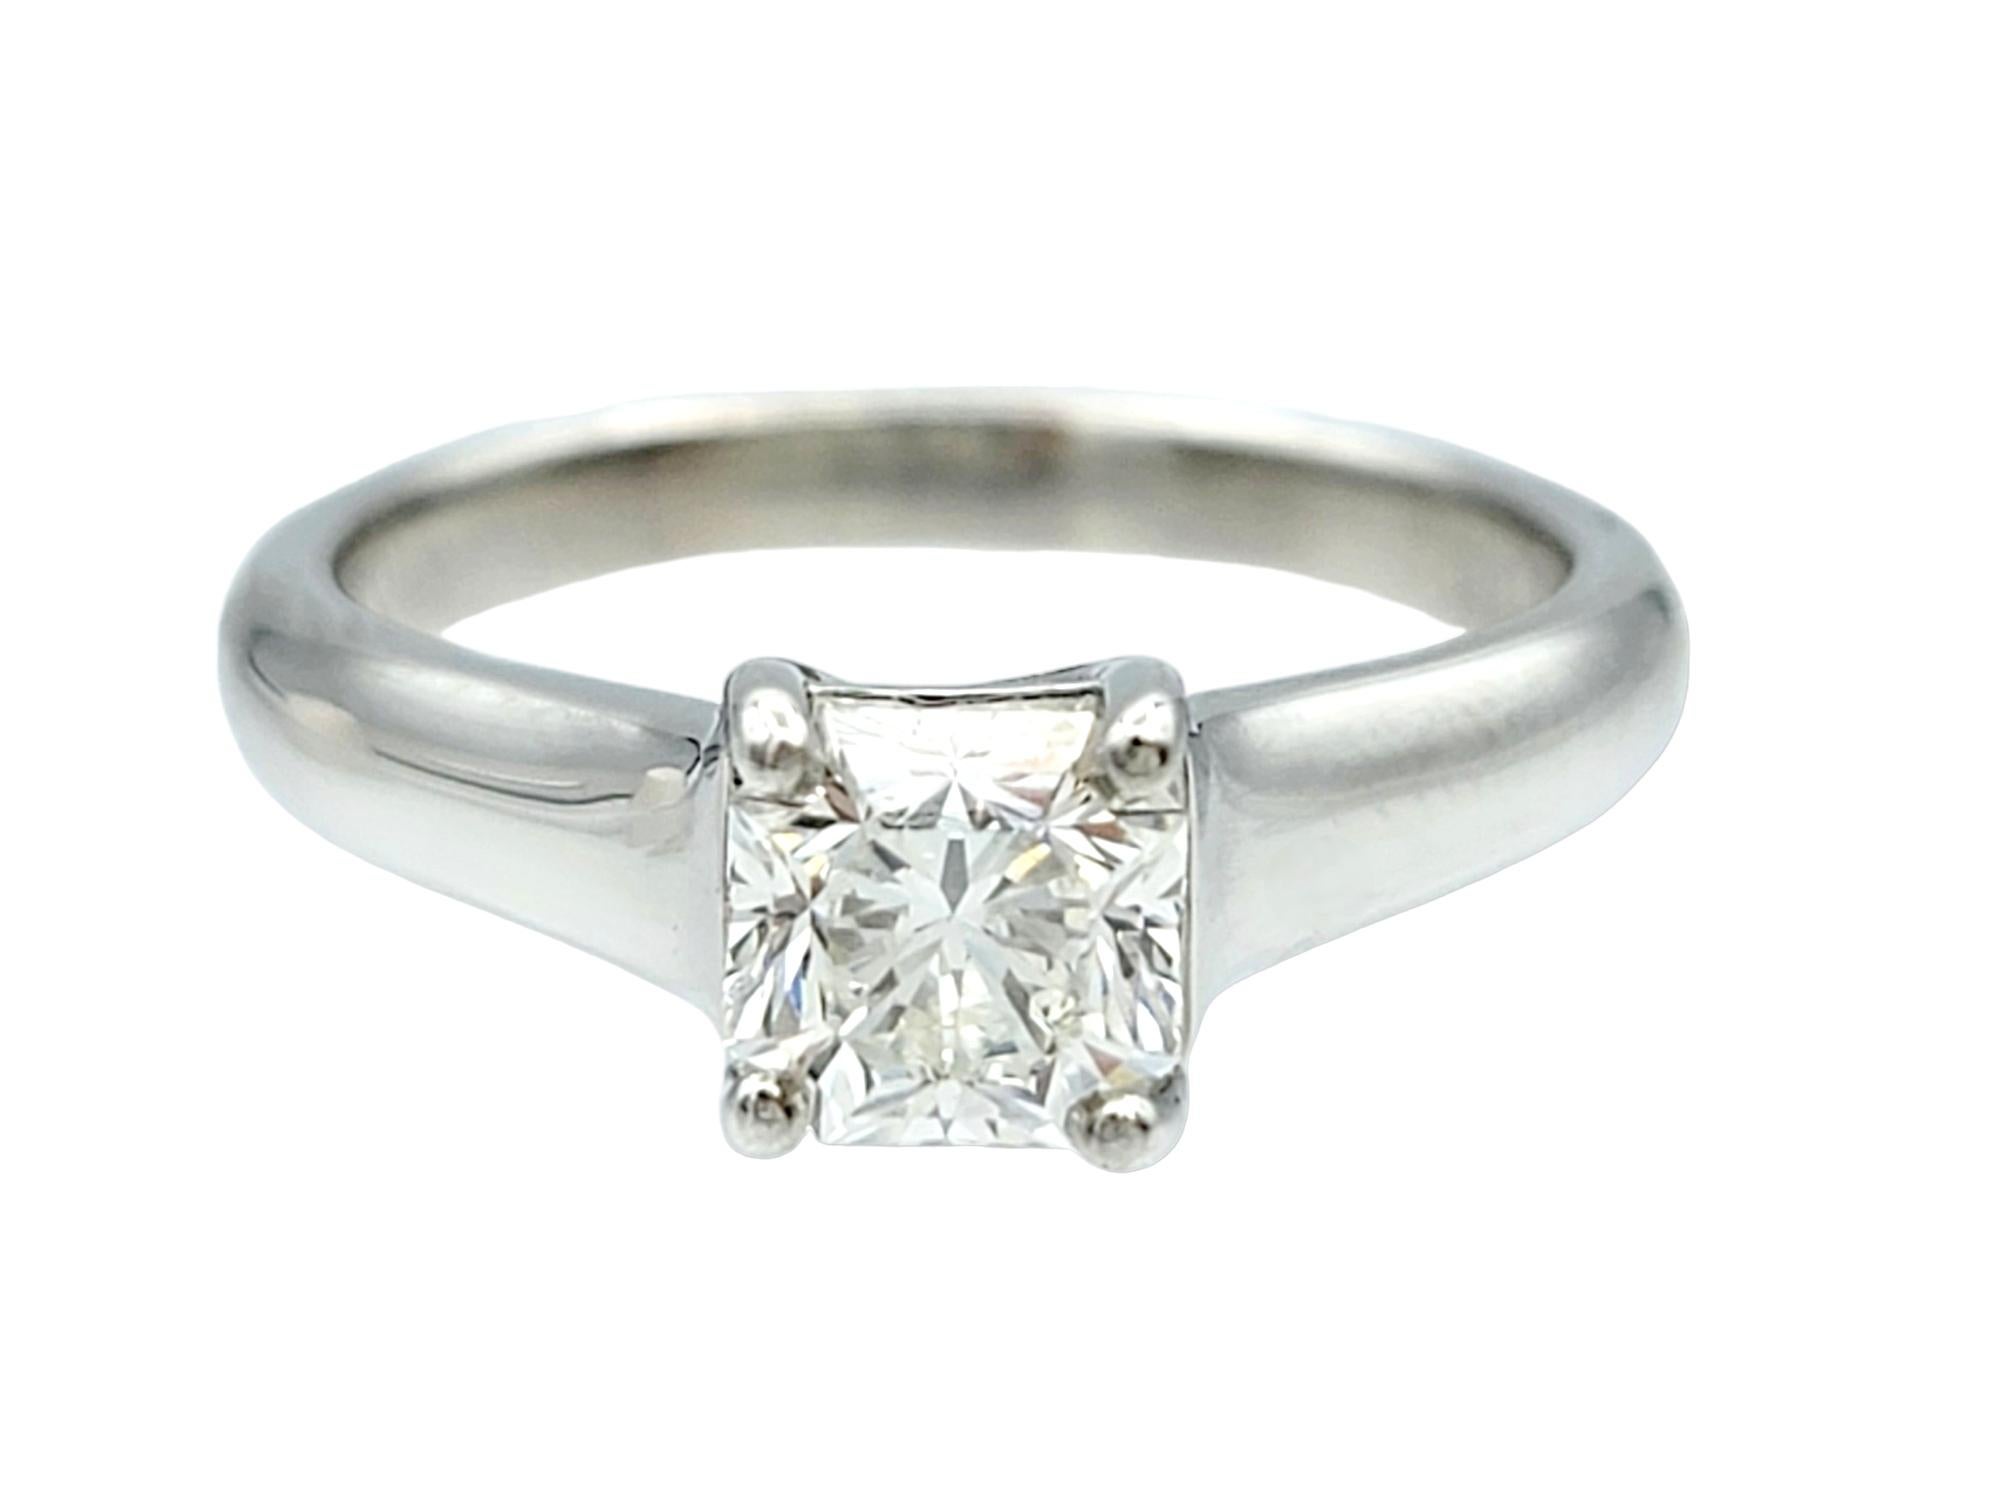 Ring size: 5 

This gorgeous Tiffany & Co. platinum engagement ring is an embodiment of timeless beauty and the promise of a lifetime of love. At its heart lies a magnificent solitaire diamond, cut into Tiffany's exquisite trademark cut, the Lucida